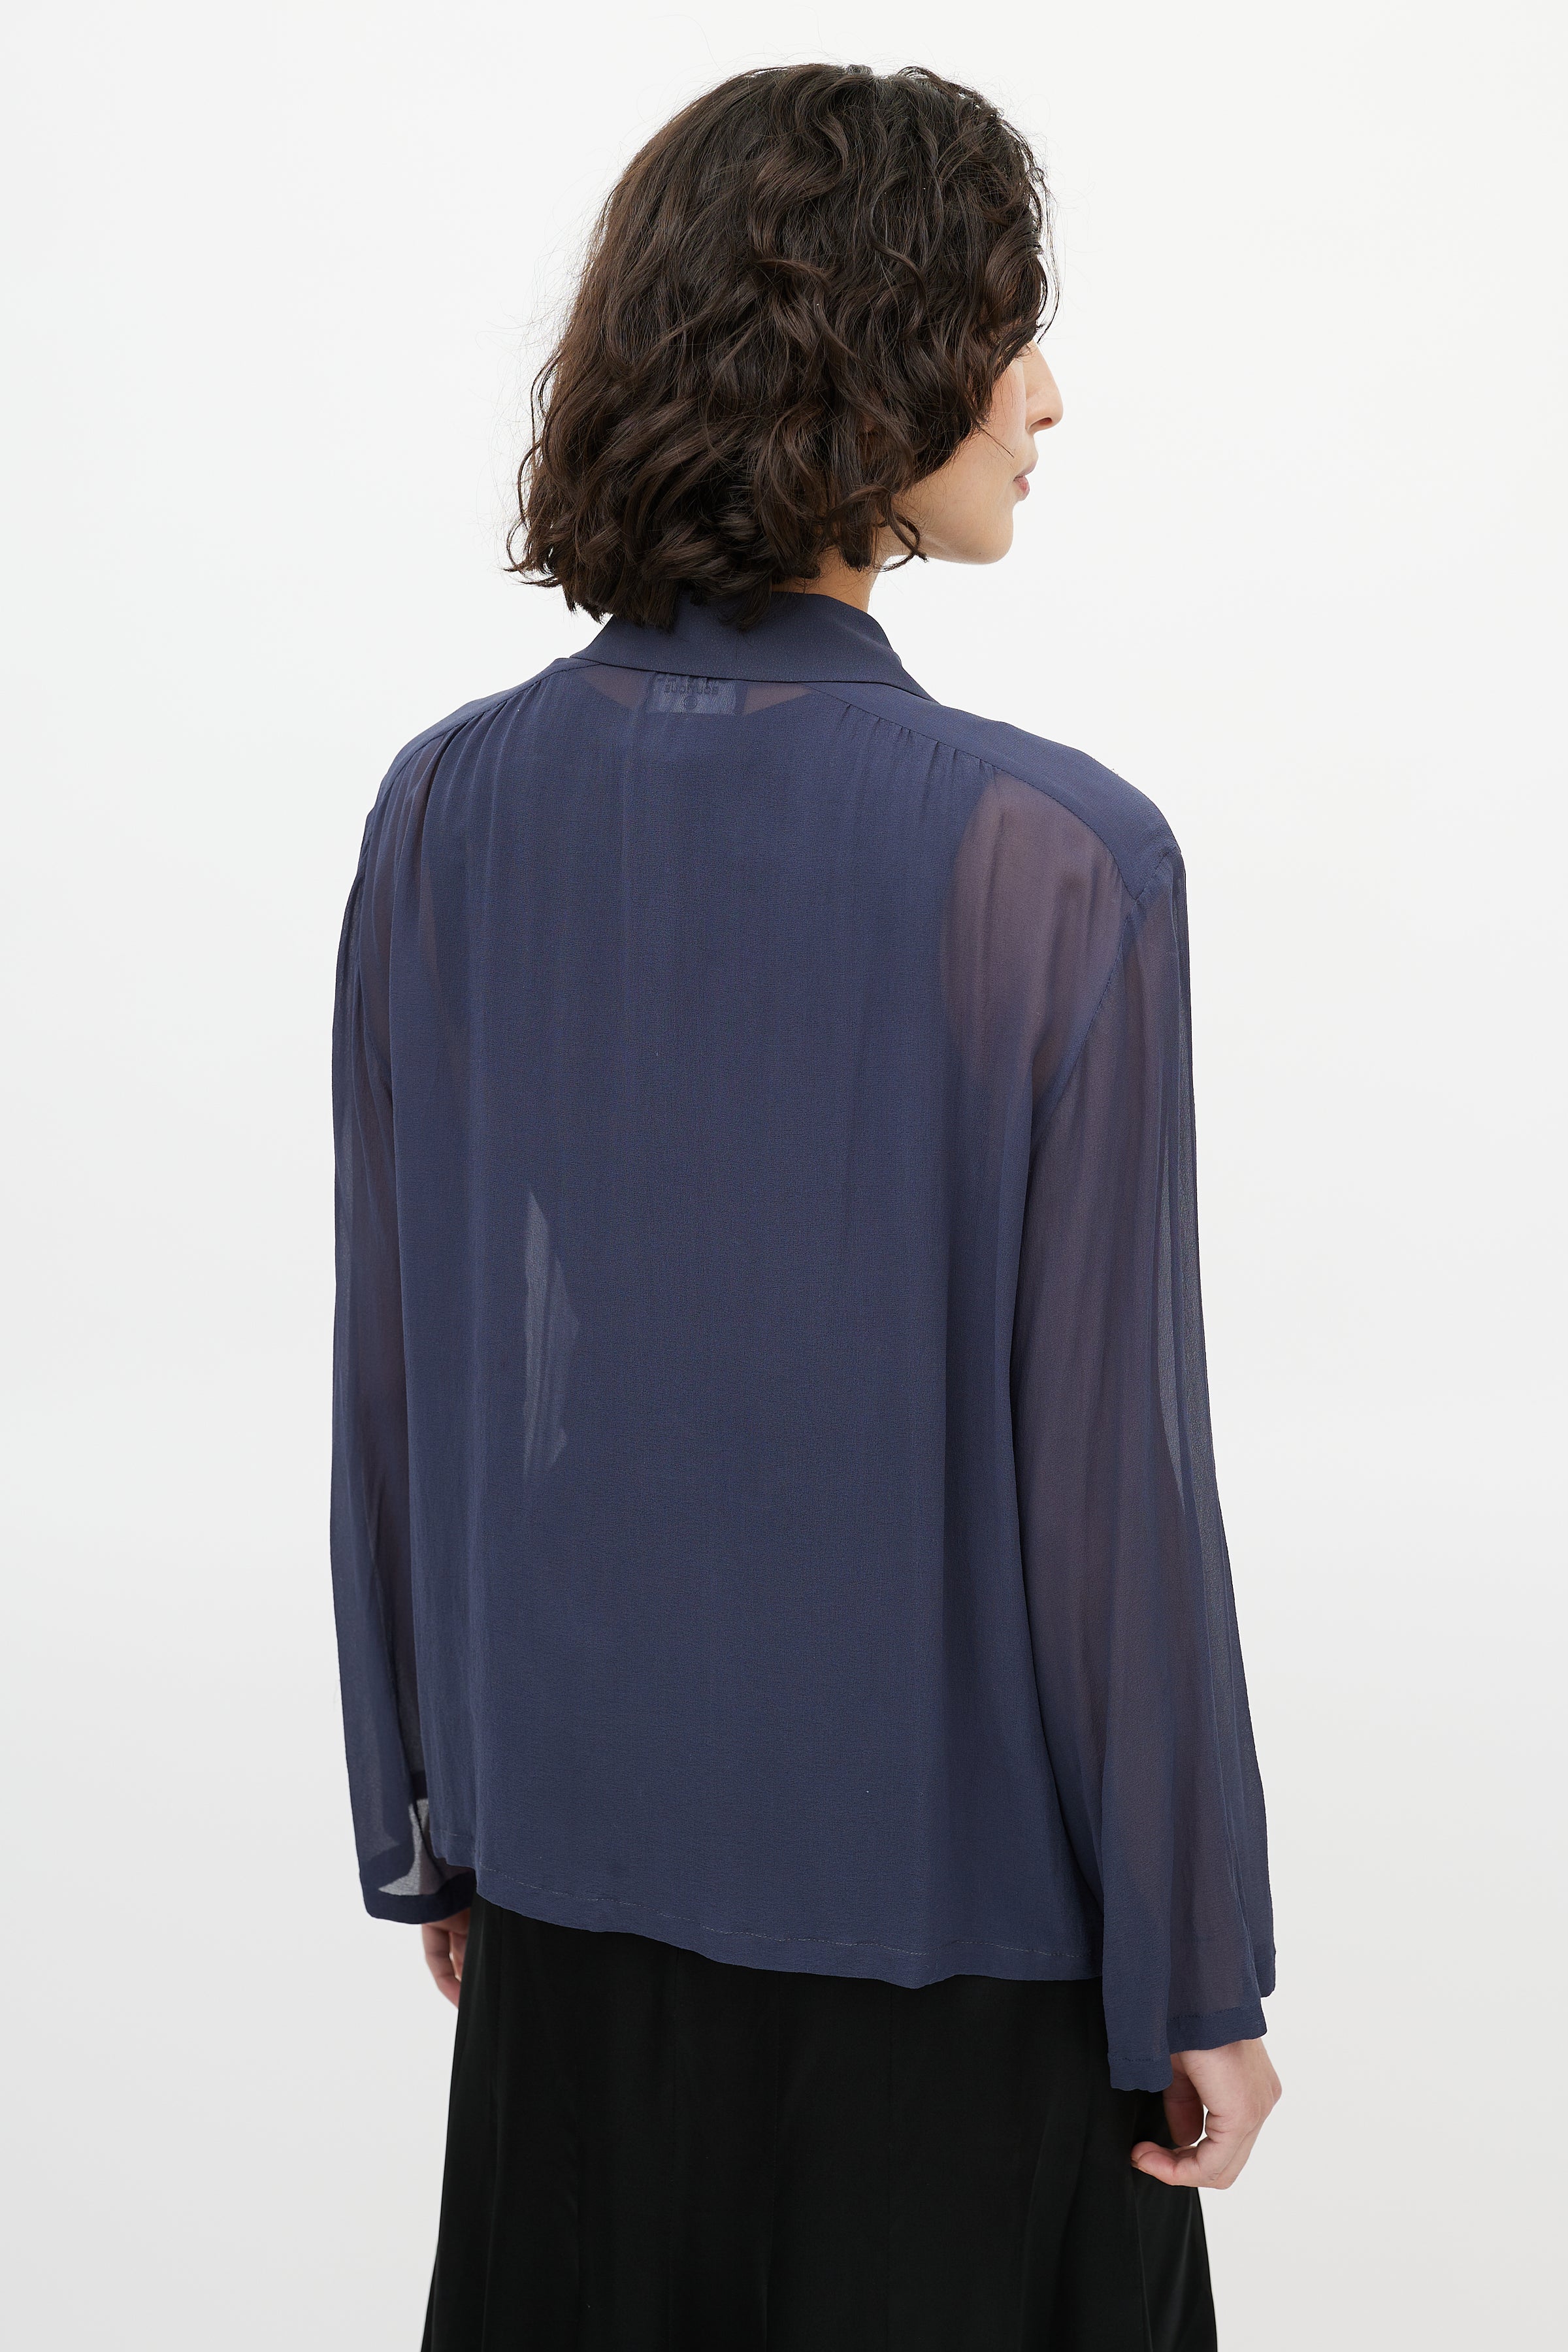 Chanel // Navy Sheer Scarf Blouse – VSP Consignment